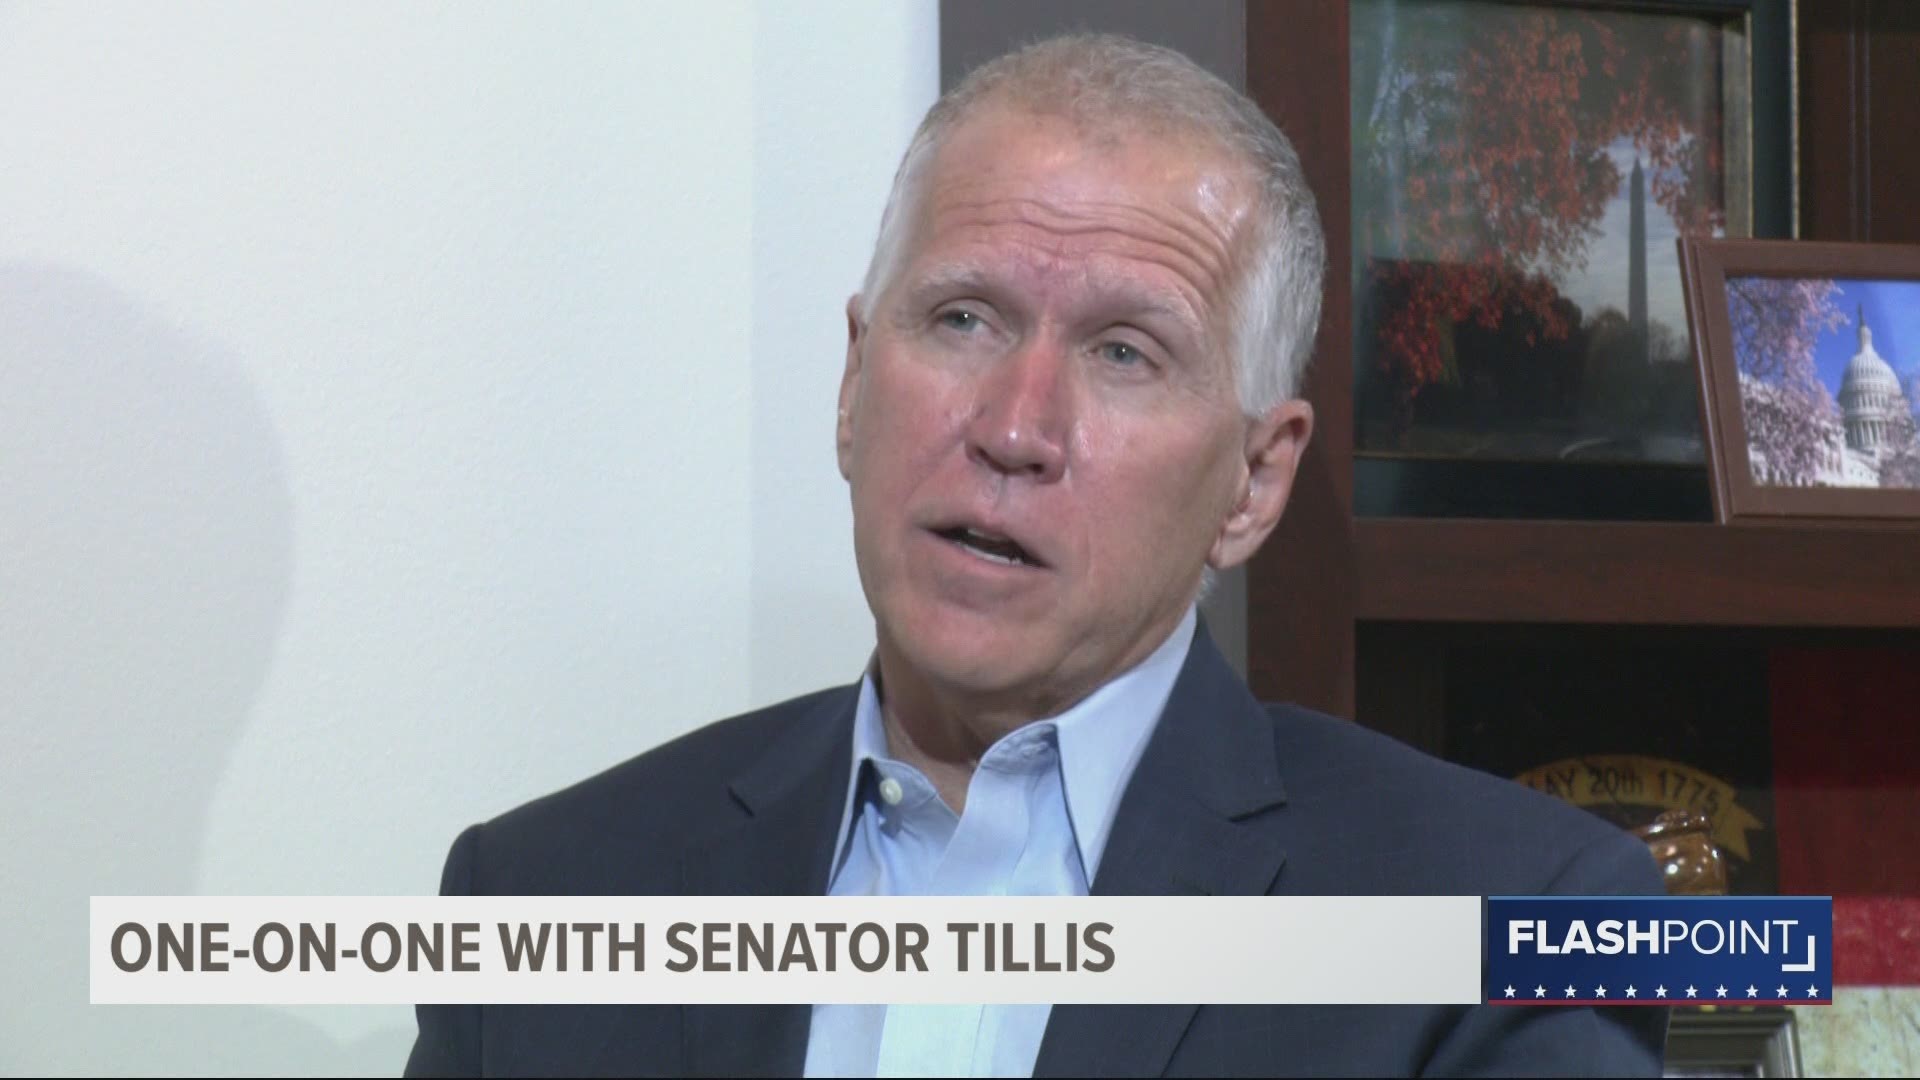 Sen. Thom Tillis provides Ben Thompson with insight into the political climate on Capitol Hill.